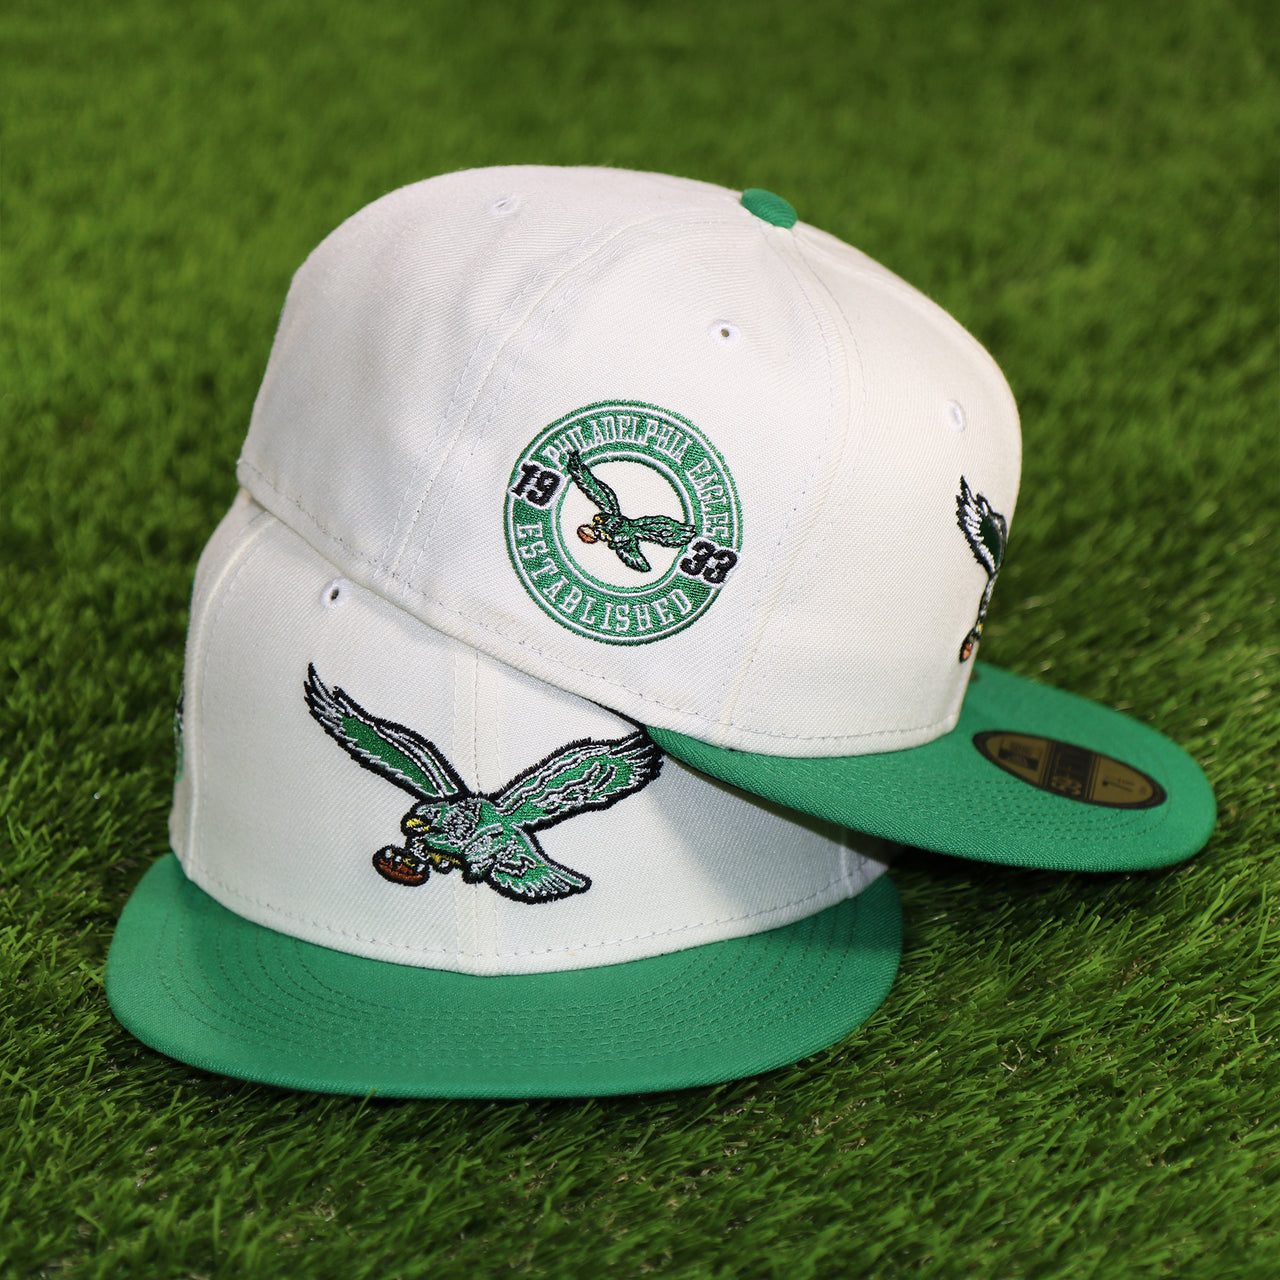 The Throwback Philadelphia Eagles Chrome Logo NFL Eagles SIde Patch 59Fifty Fitted Cap | Cream Fitted Cap with the Throwback Patch